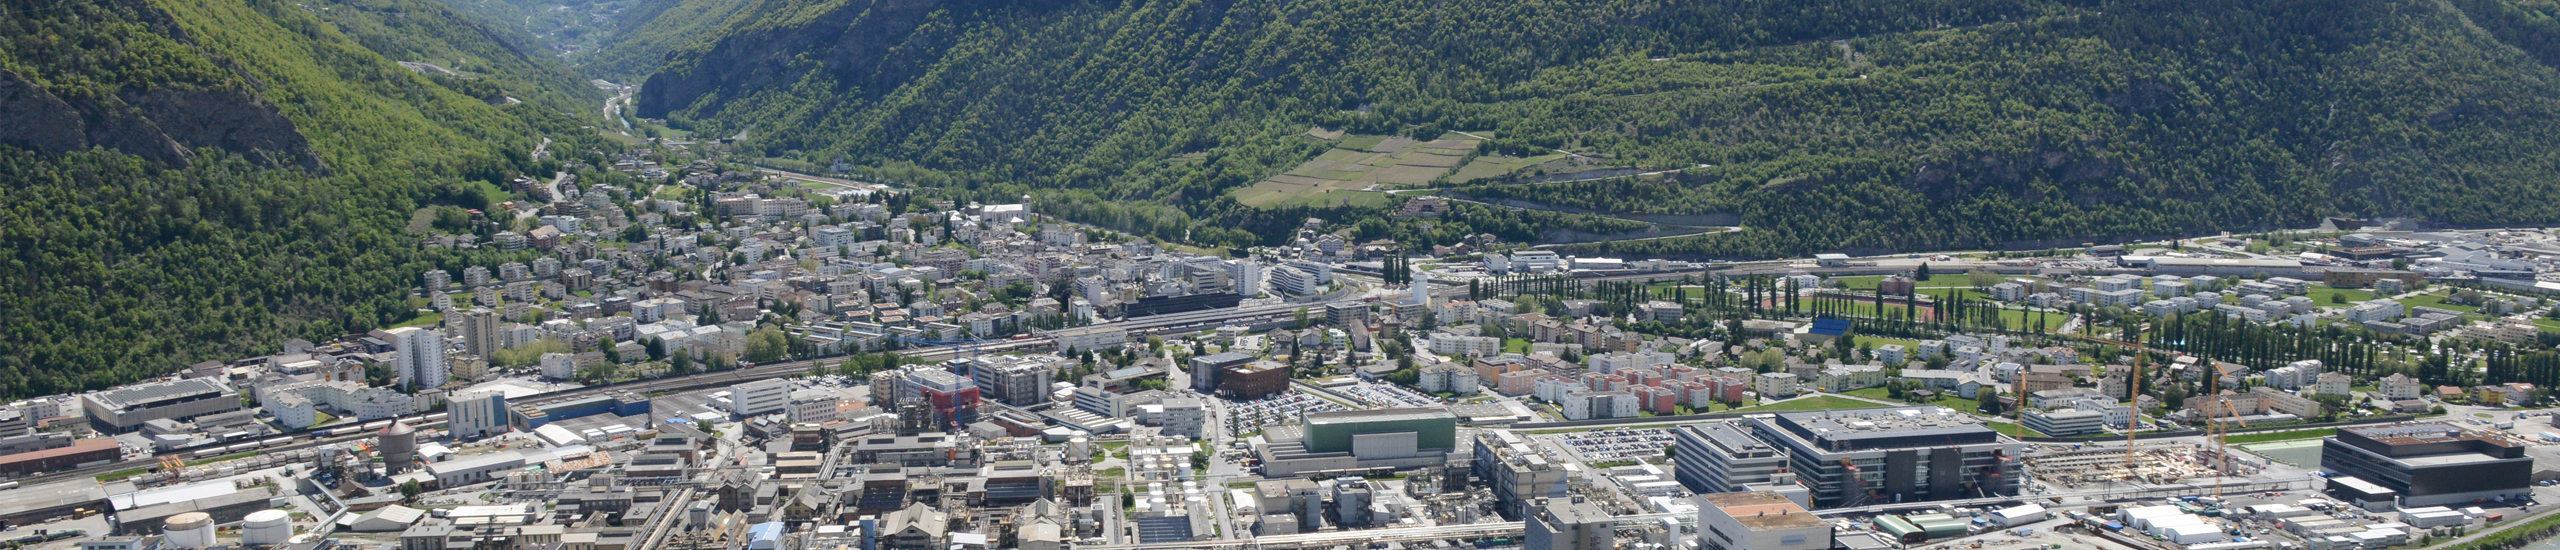 visp view from above